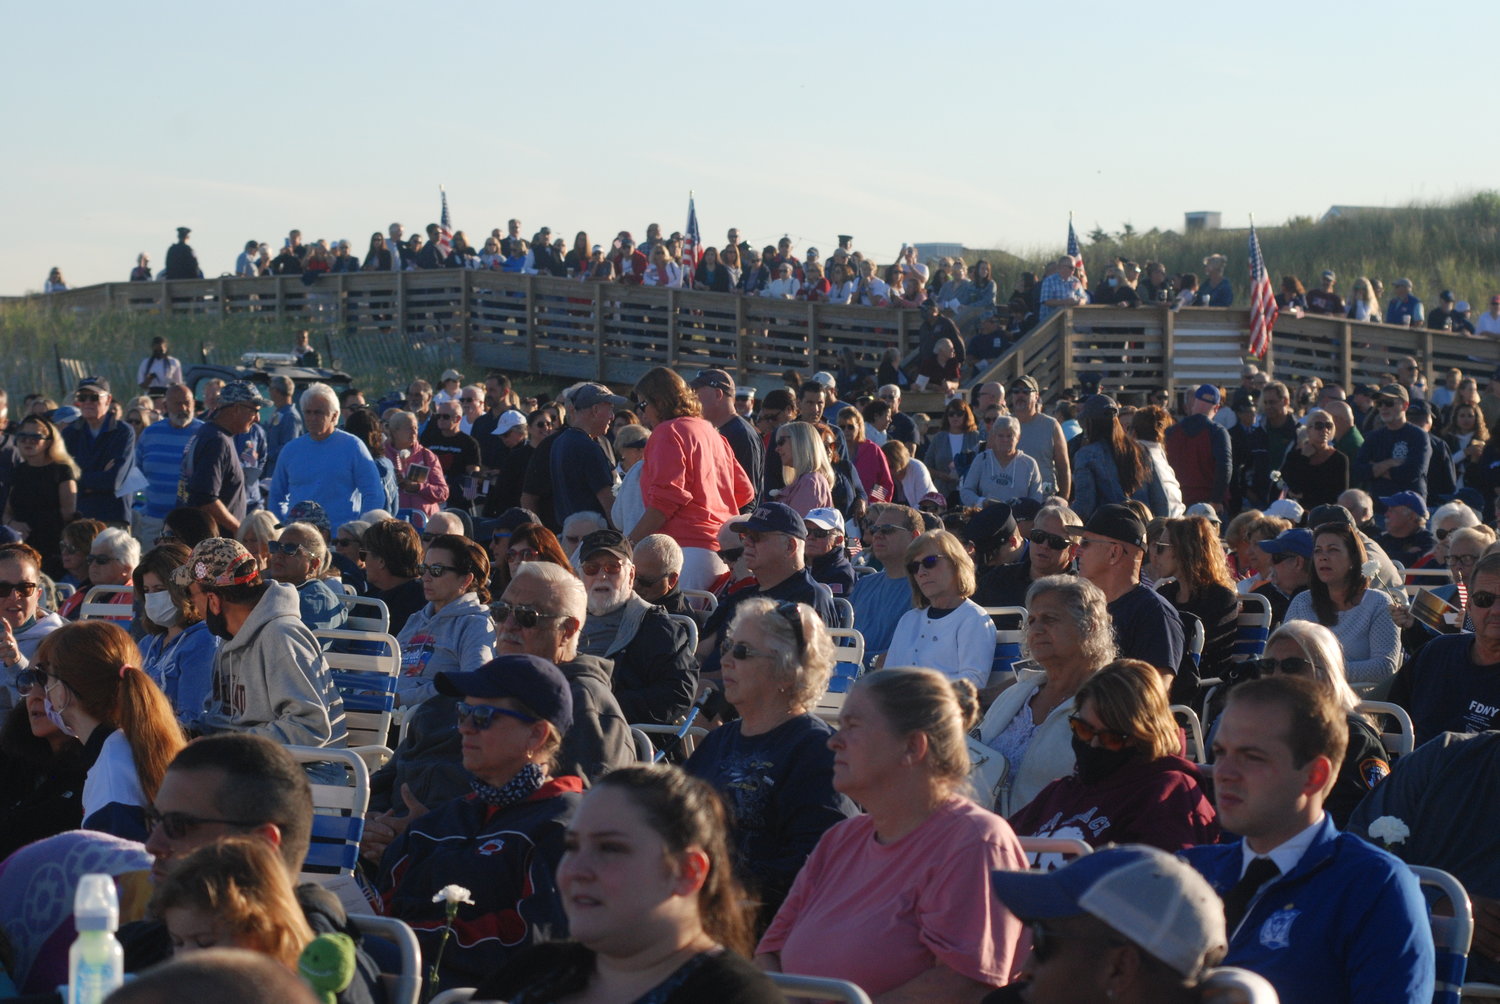 An estimated 2,000 people turned out for the town’s 9/11 ceremony.